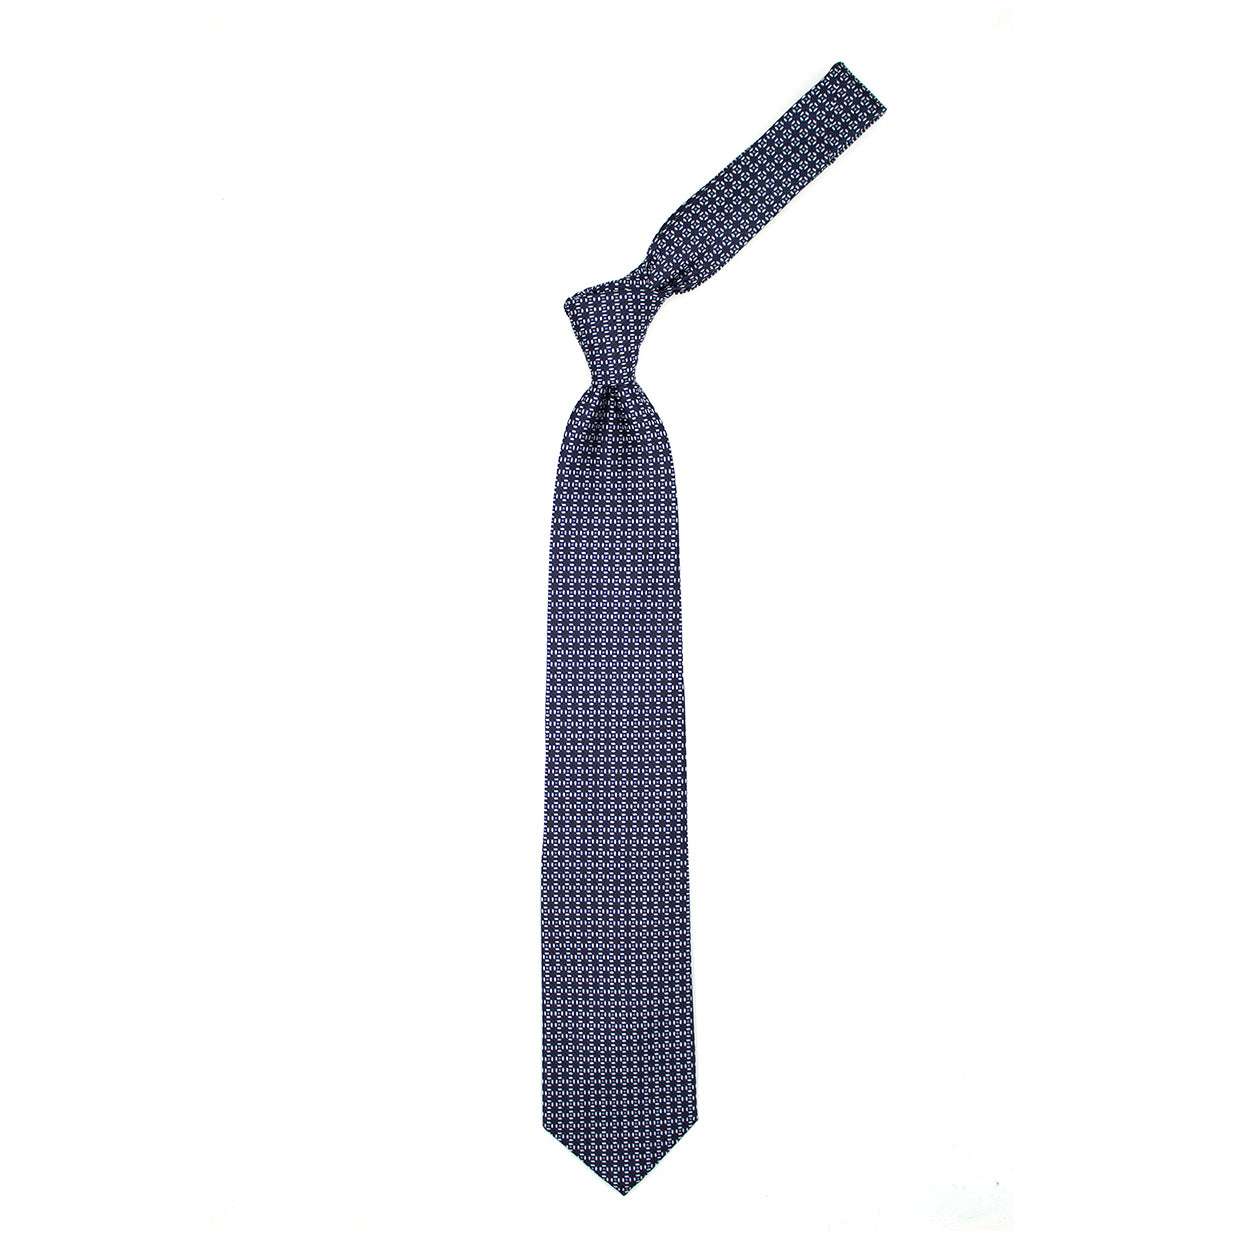 Blue tie with white and light blue geometric pattern